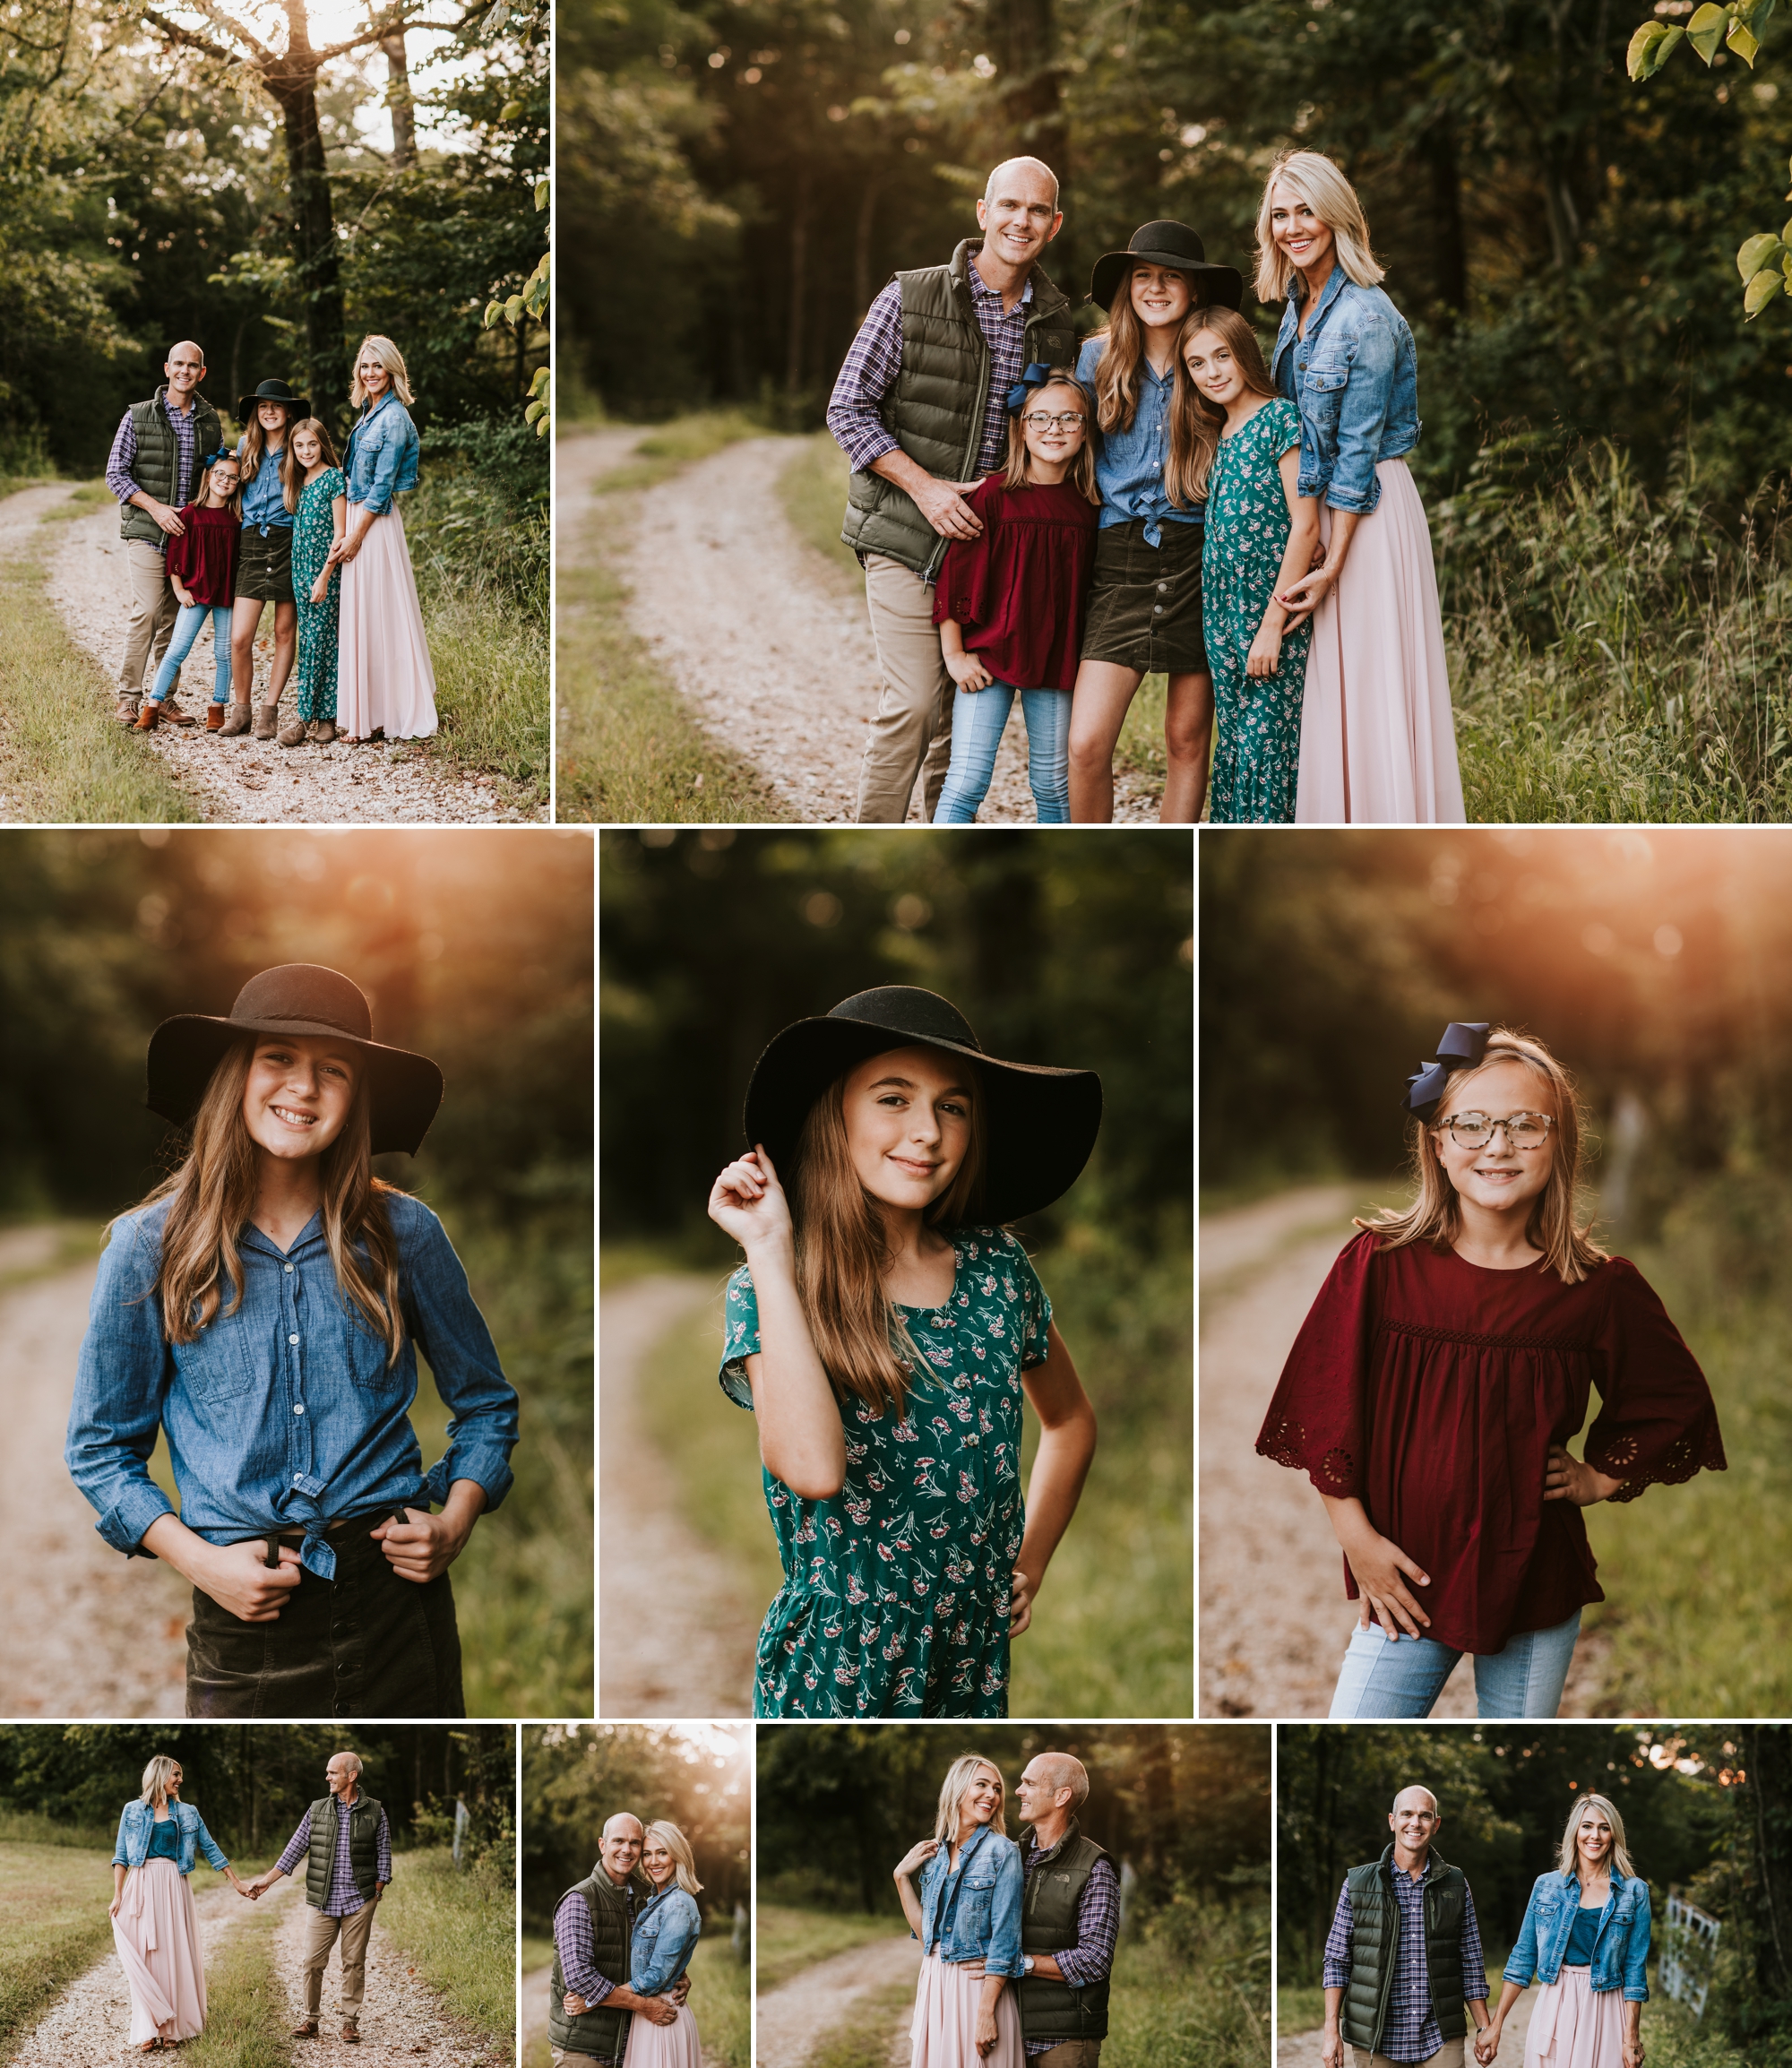 Evening family session with 3 girls and two dogs in a rural setting shot by Dana Marquart at Photogenics on Location.